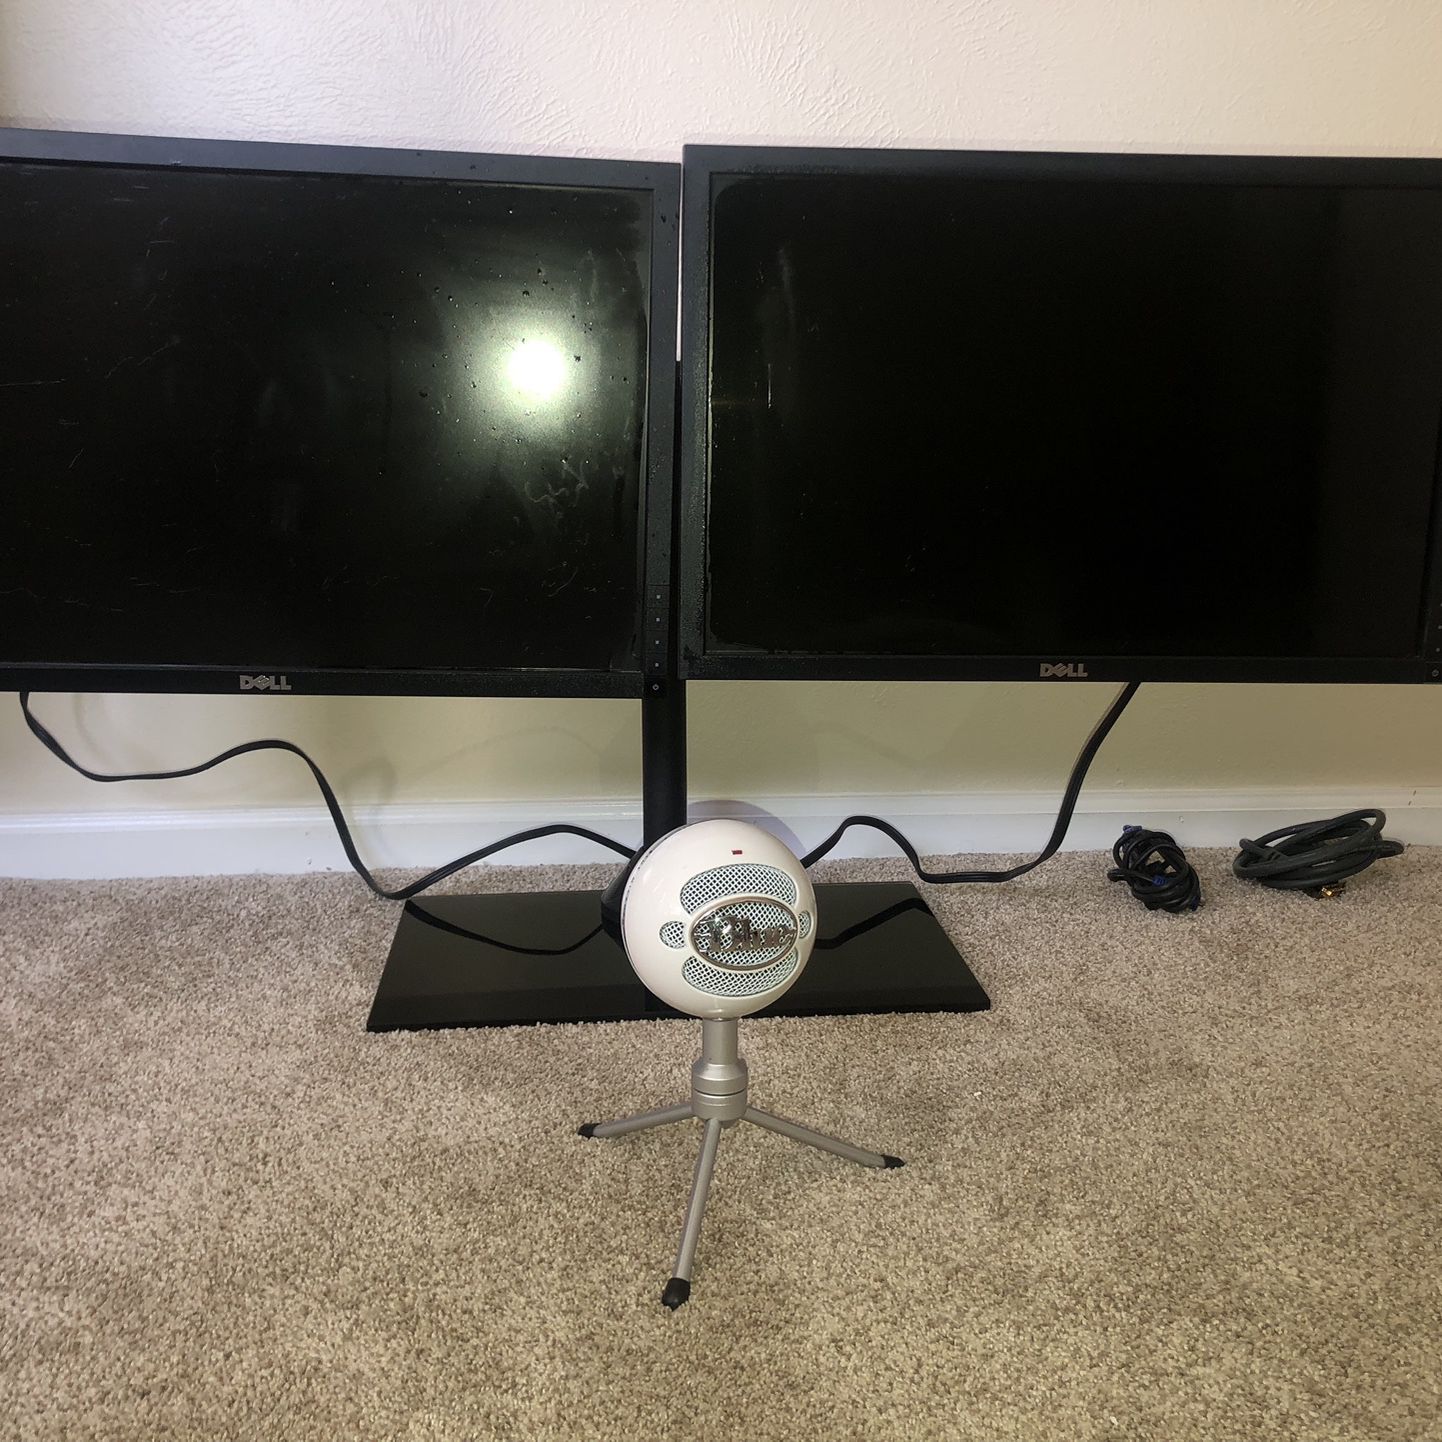 2 Dell Monitors With Adjustable Stand  And snowball Microphone